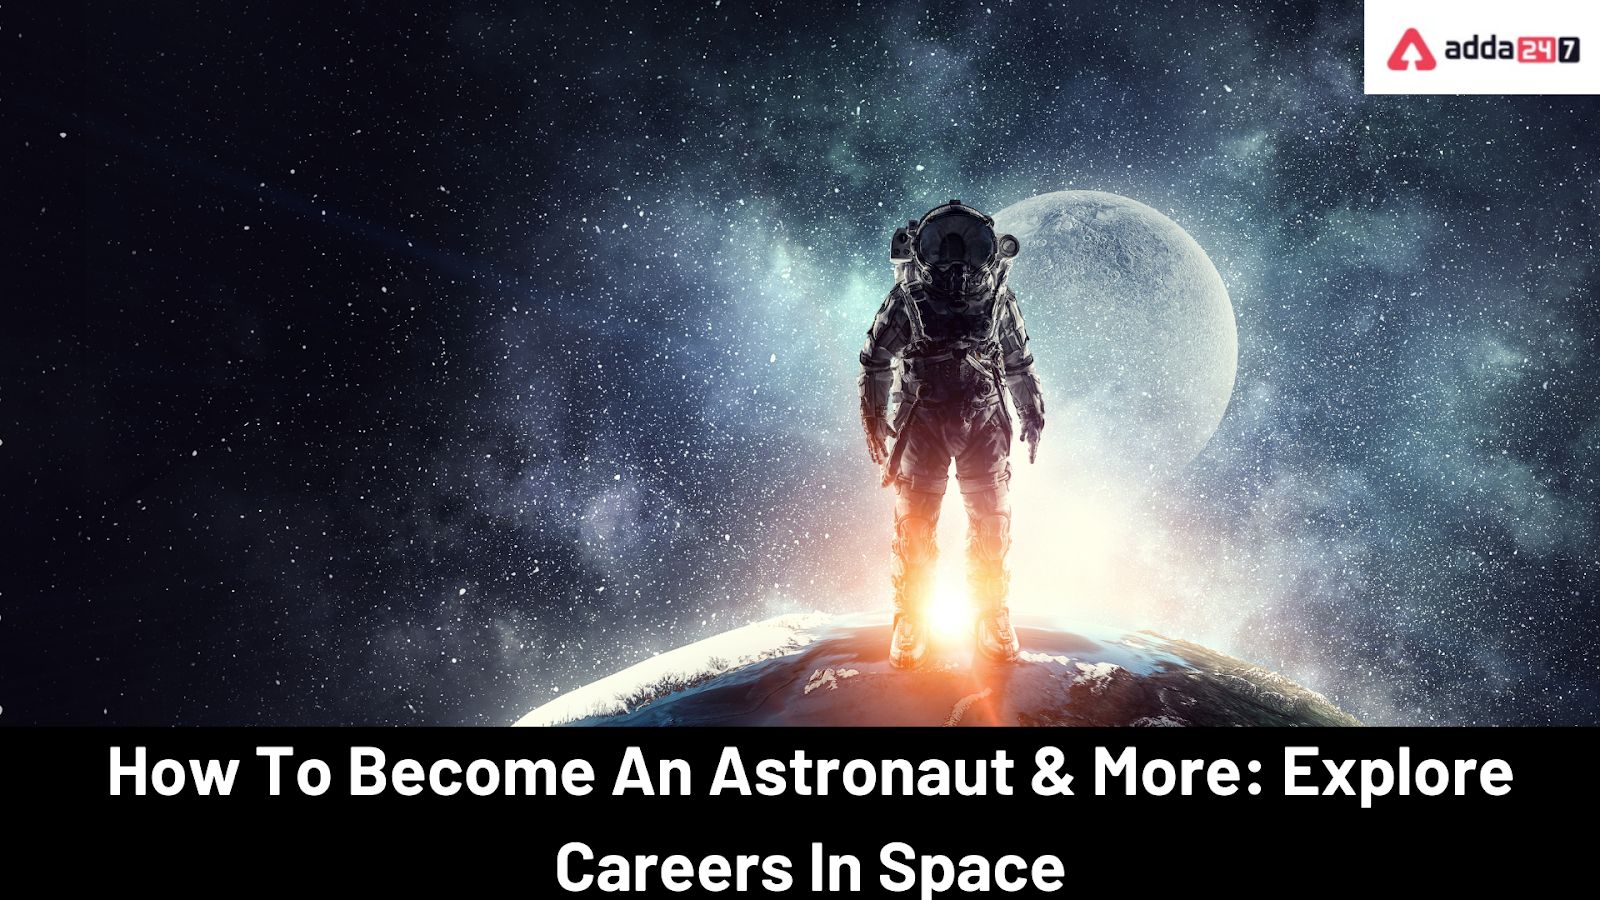 How To Become AnAstronaut & More: Explore Careers In Space